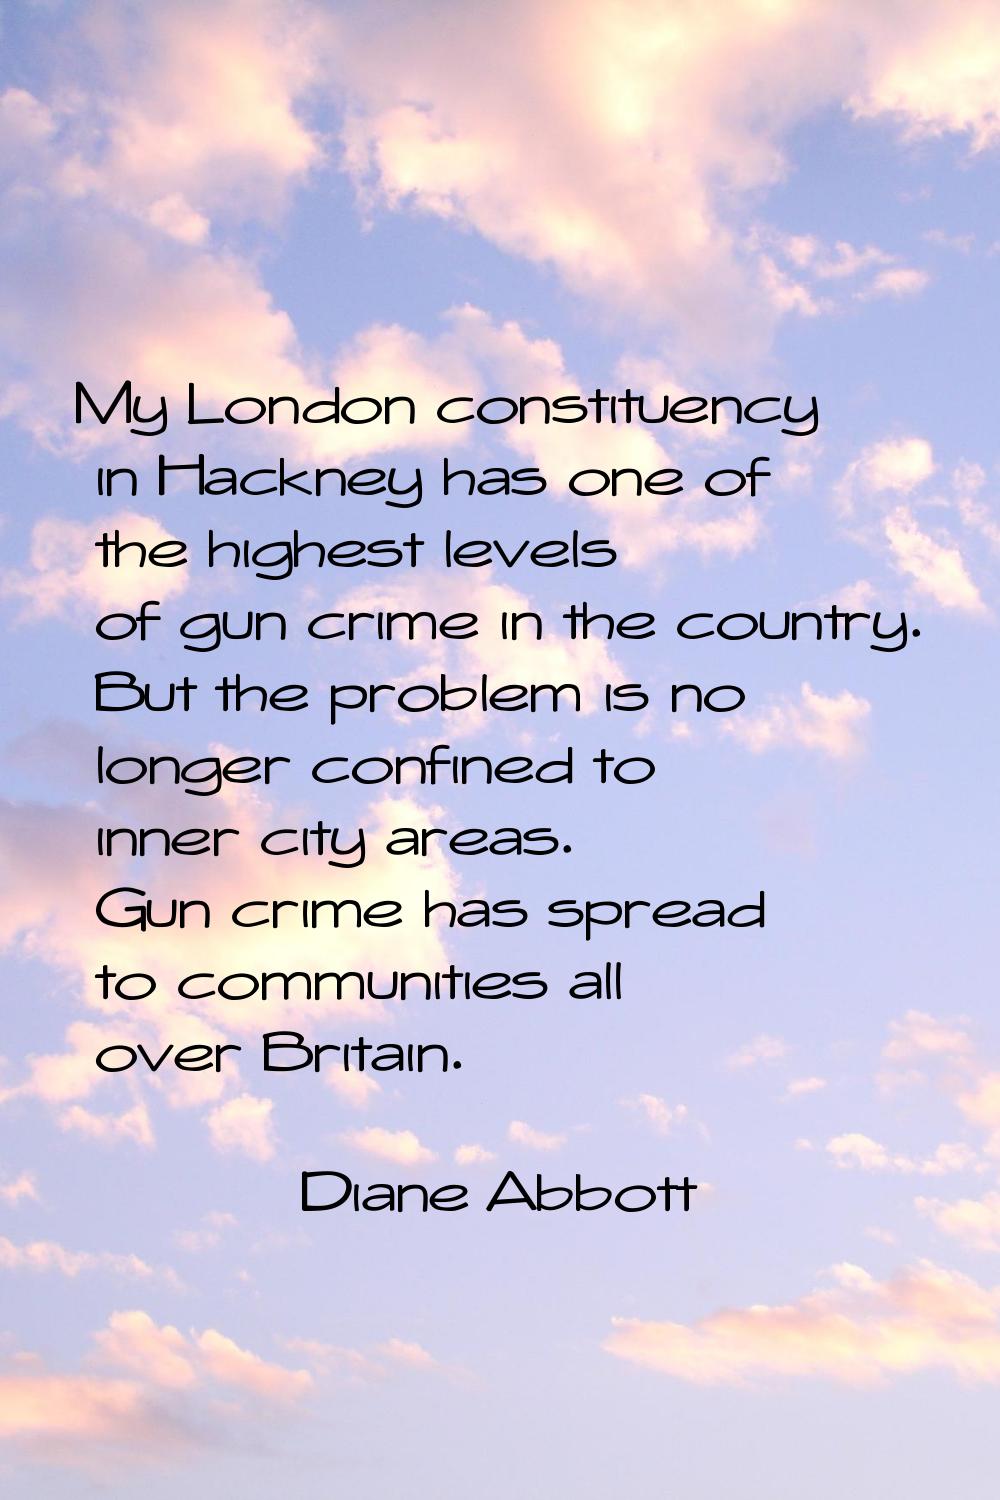 My London constituency in Hackney has one of the highest levels of gun crime in the country. But th